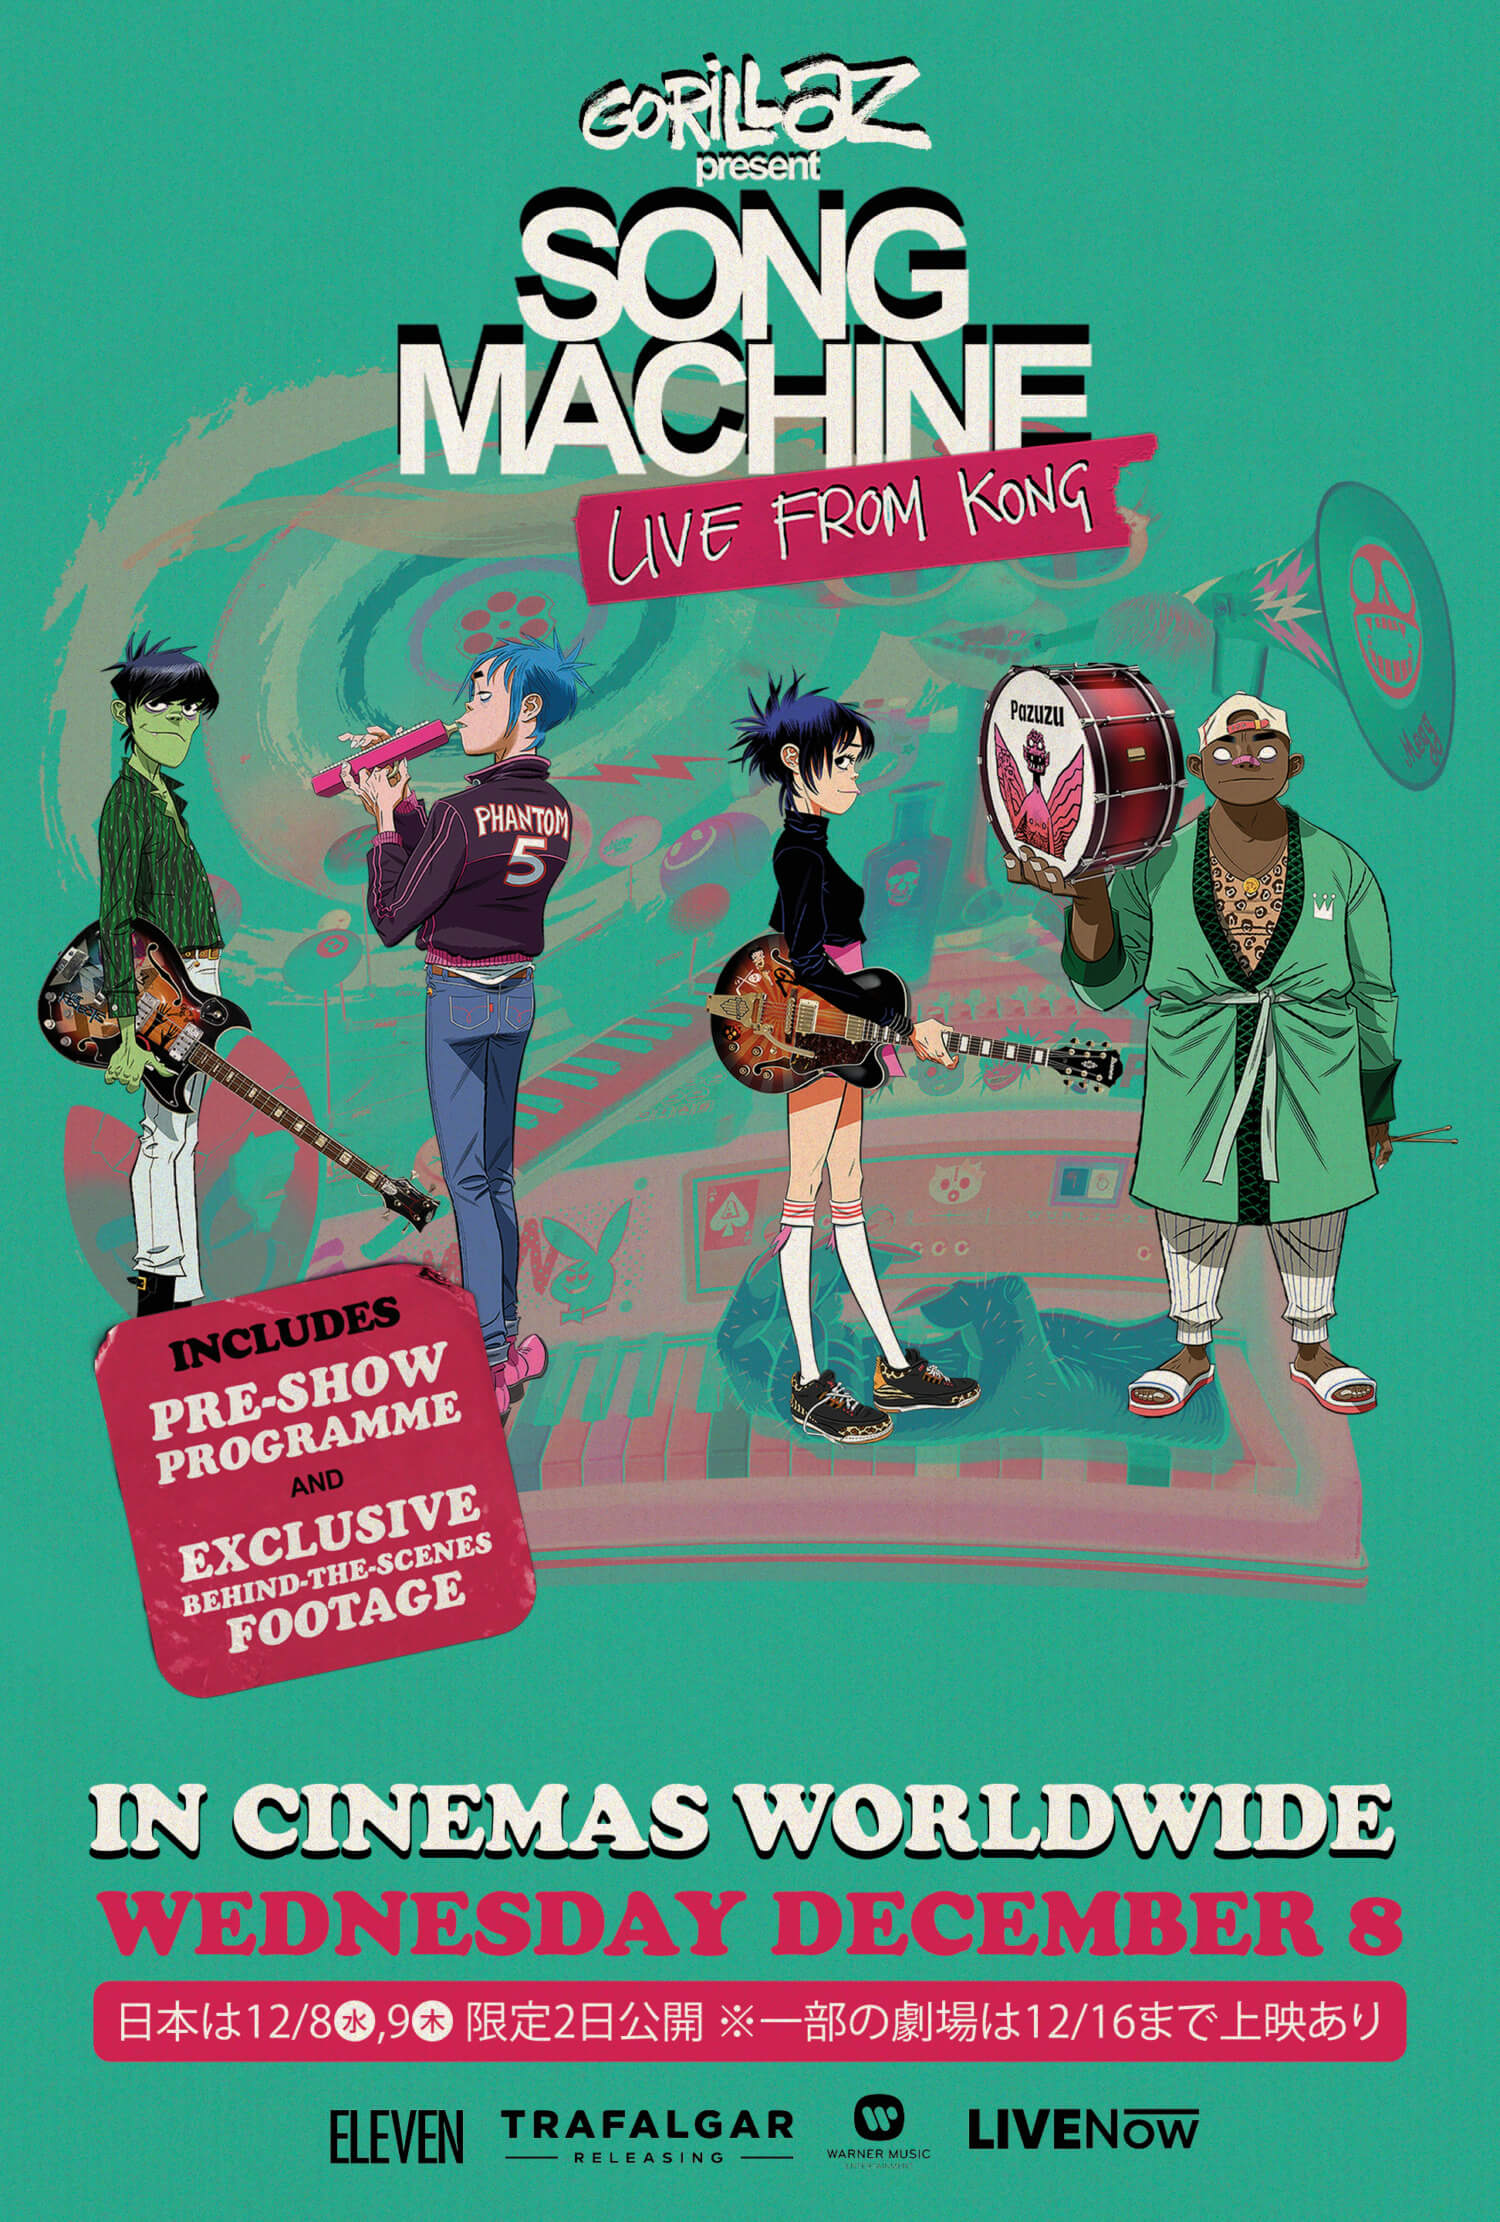 『Gorillaz: Song Machine Live From Kong』ポスター